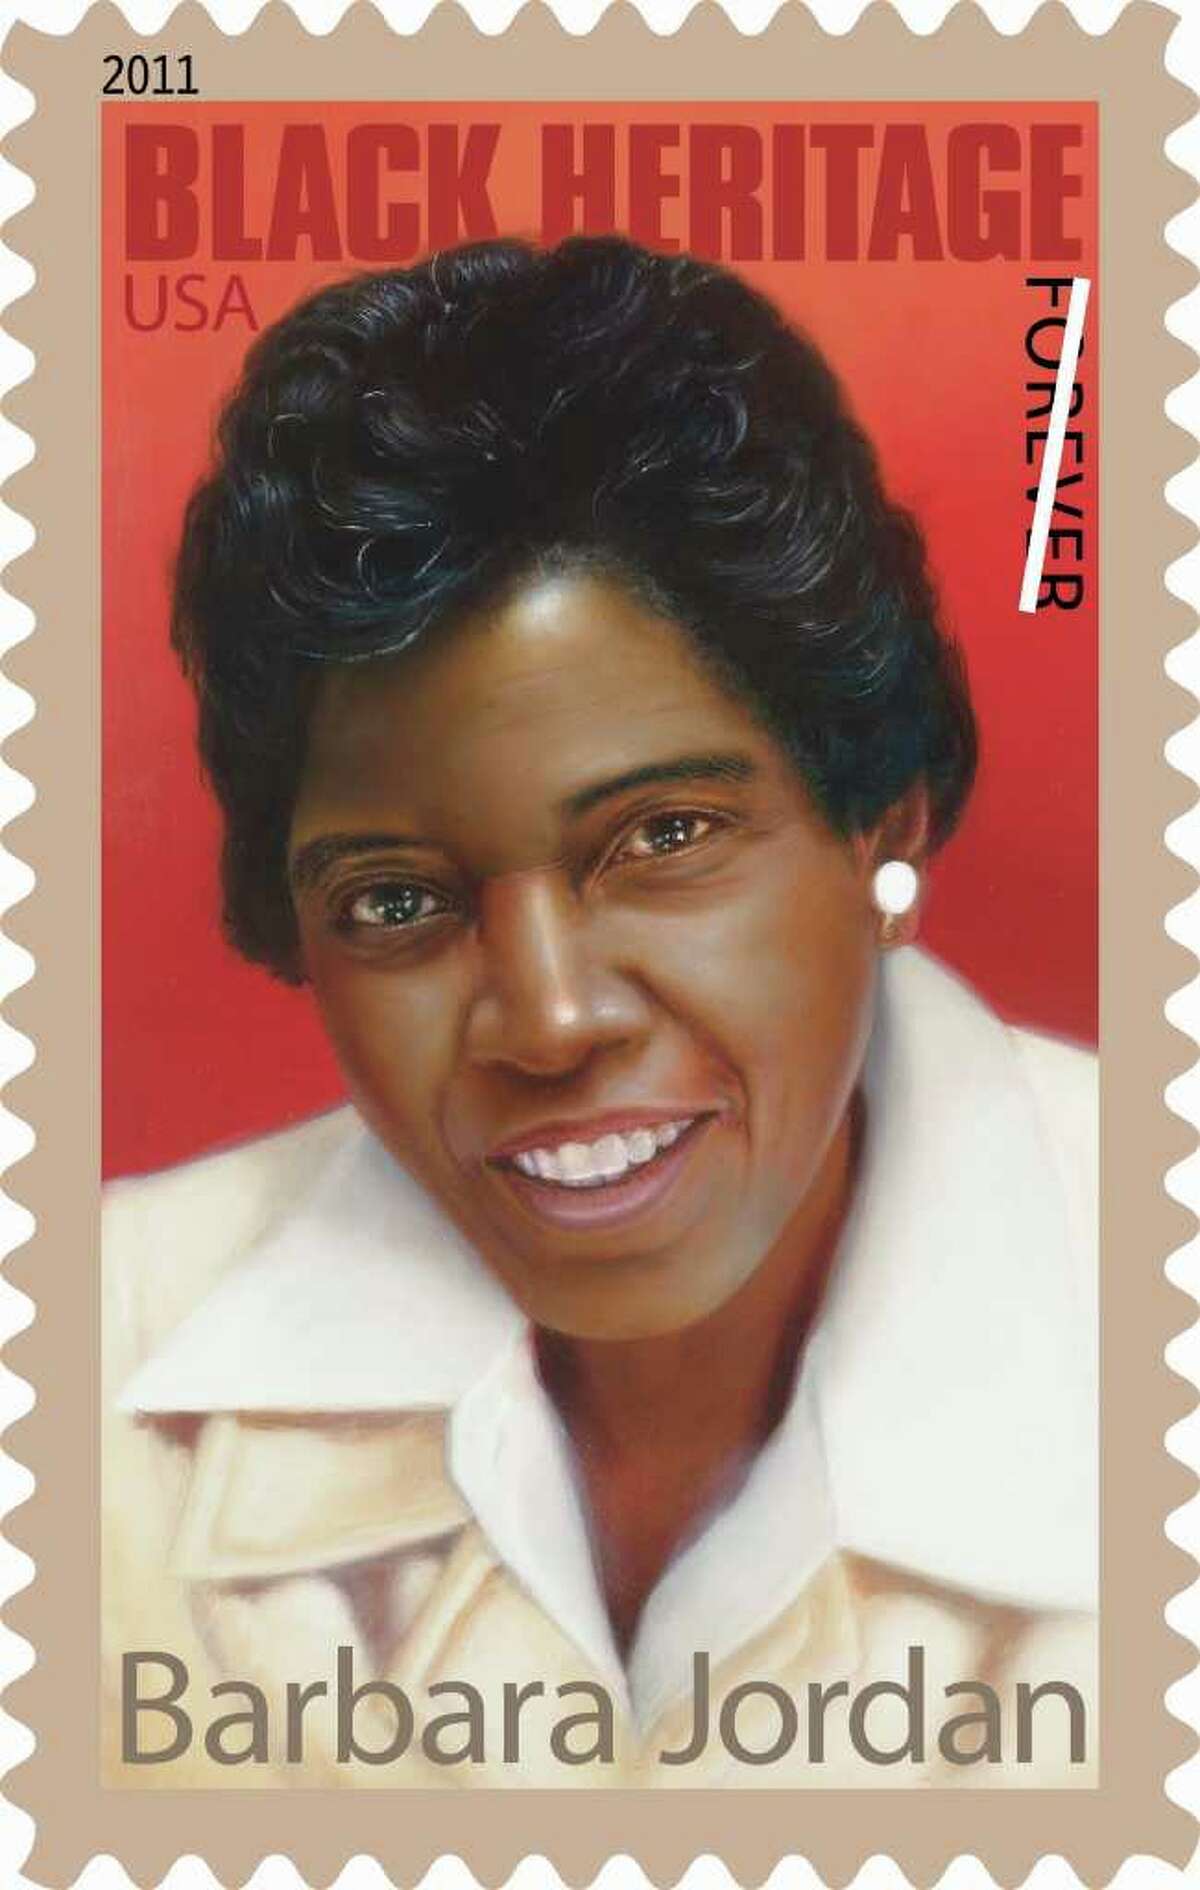 This undated handout image provided by the US Postal Service shows the Forever postage stamp featuring former Texas Rep. Barbara Jordan, part of the Black Heritage series. The new stamp was issued in Jordan's hometown of Houston Friday. (AP Photo/USPS)